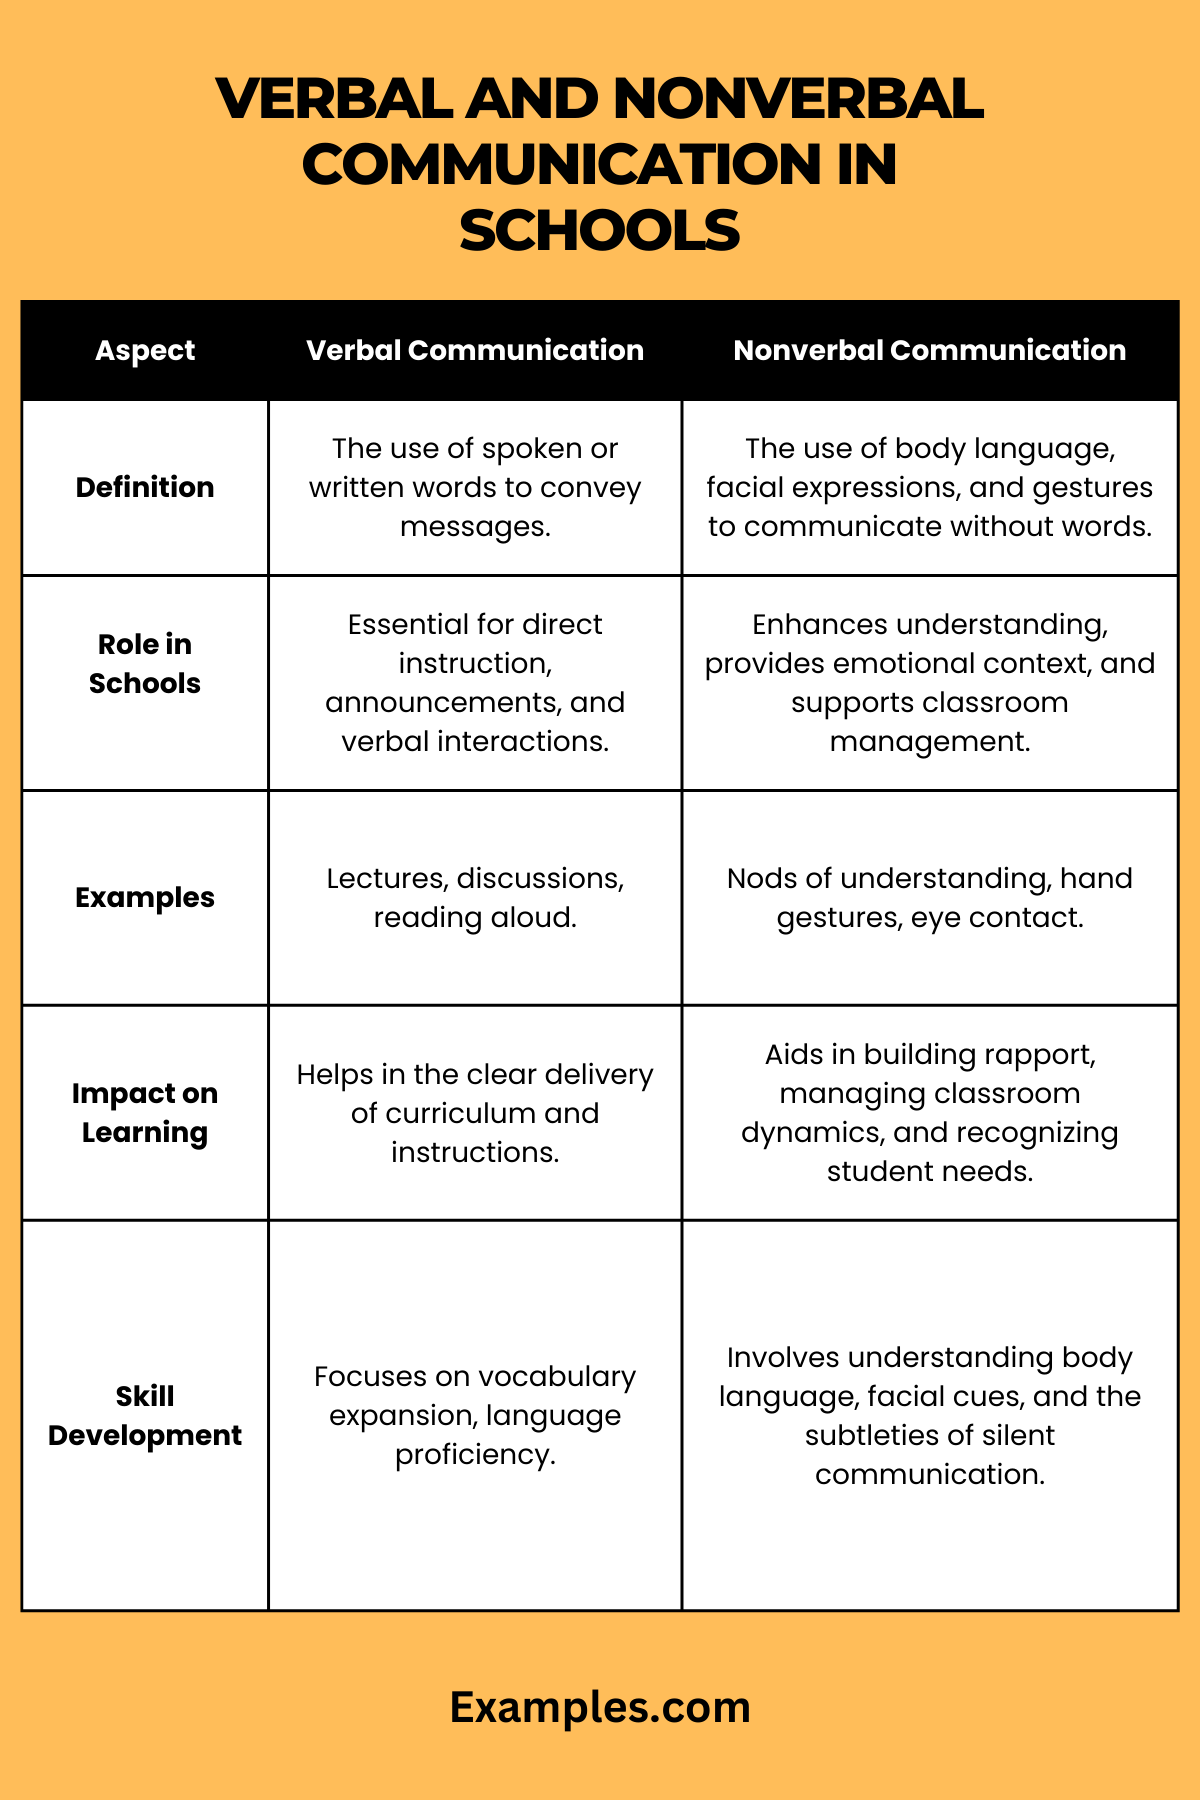 verbal and nonverbal communication in schools